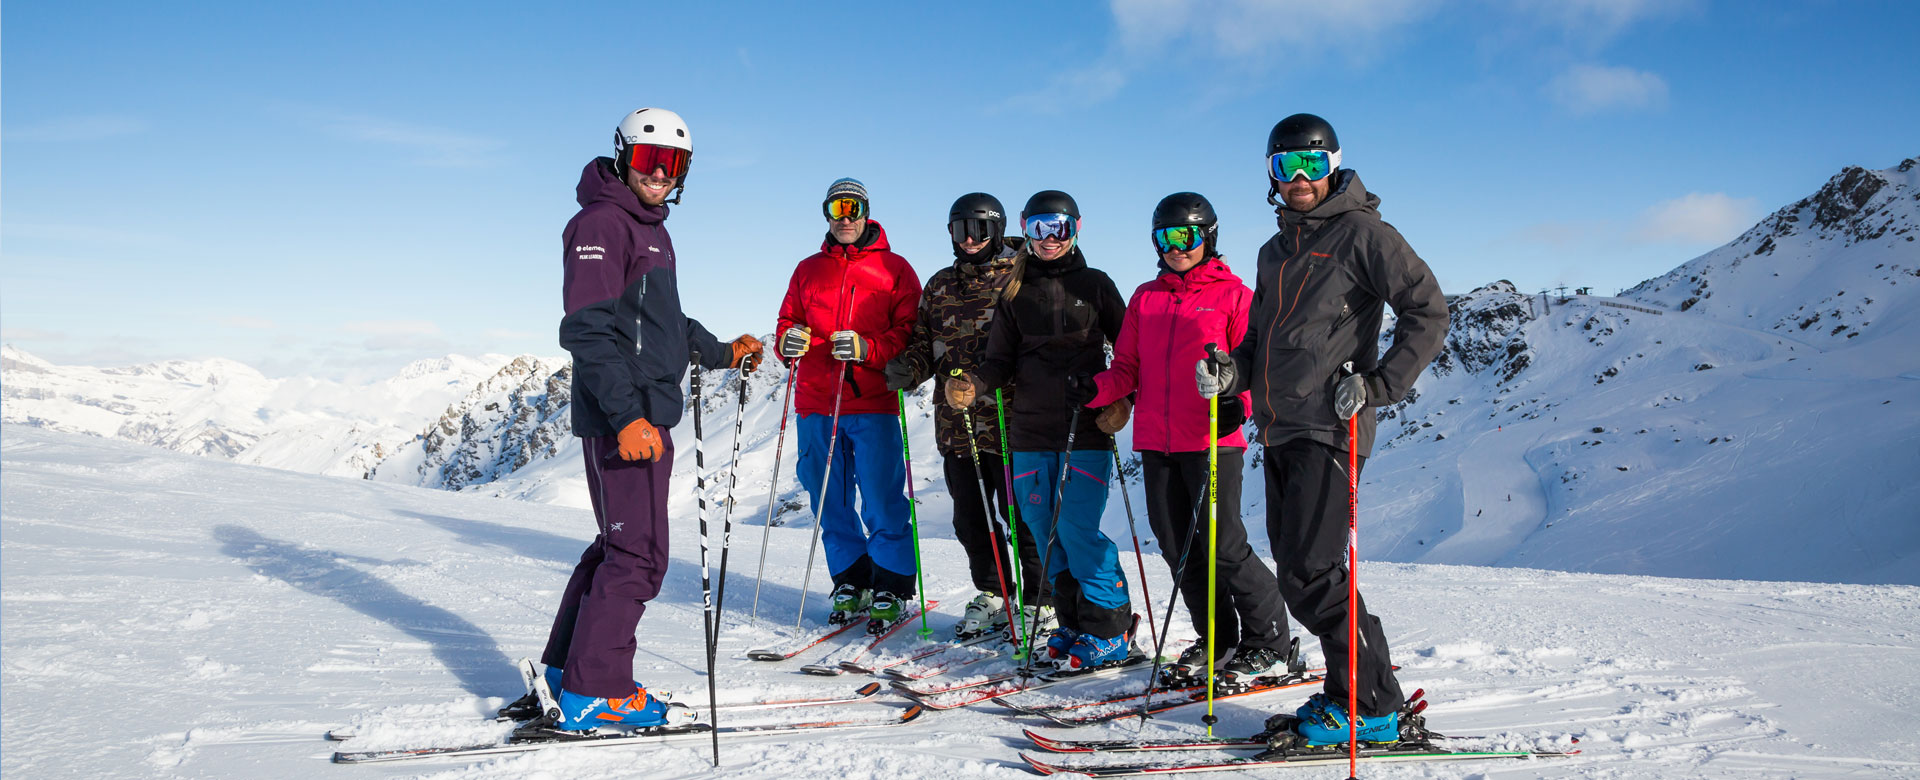 Ski Instructor Training Courses in Verbier and Saas Fee